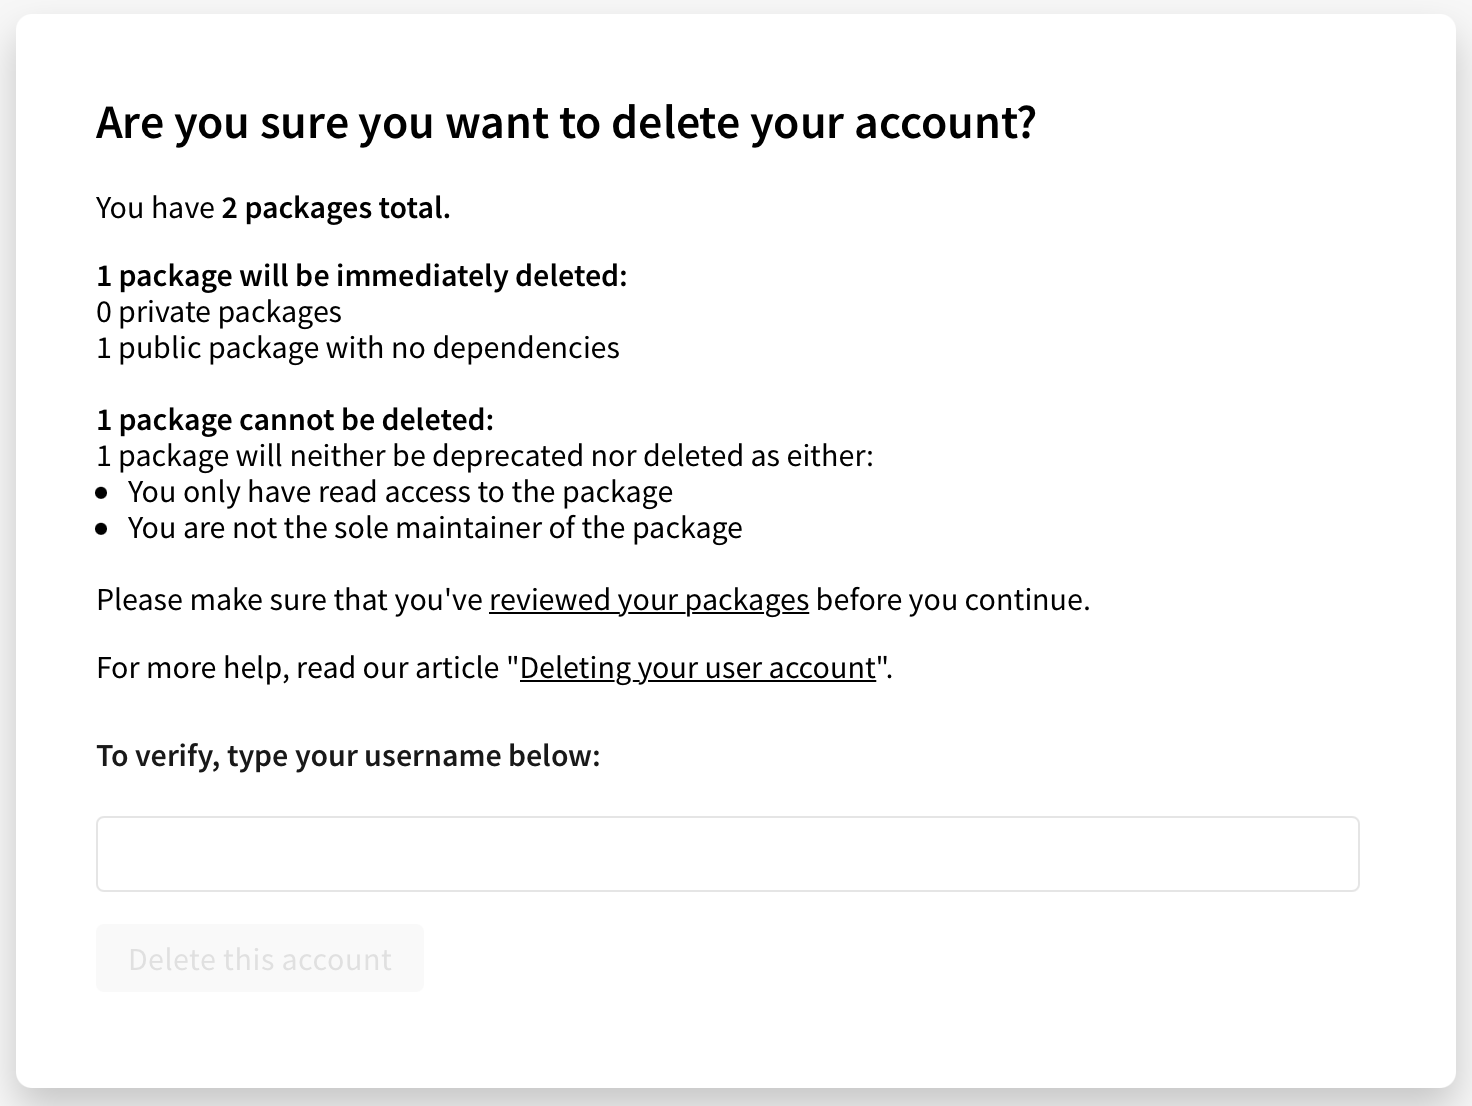 Screenshot of the confirmation screen to delete an account.